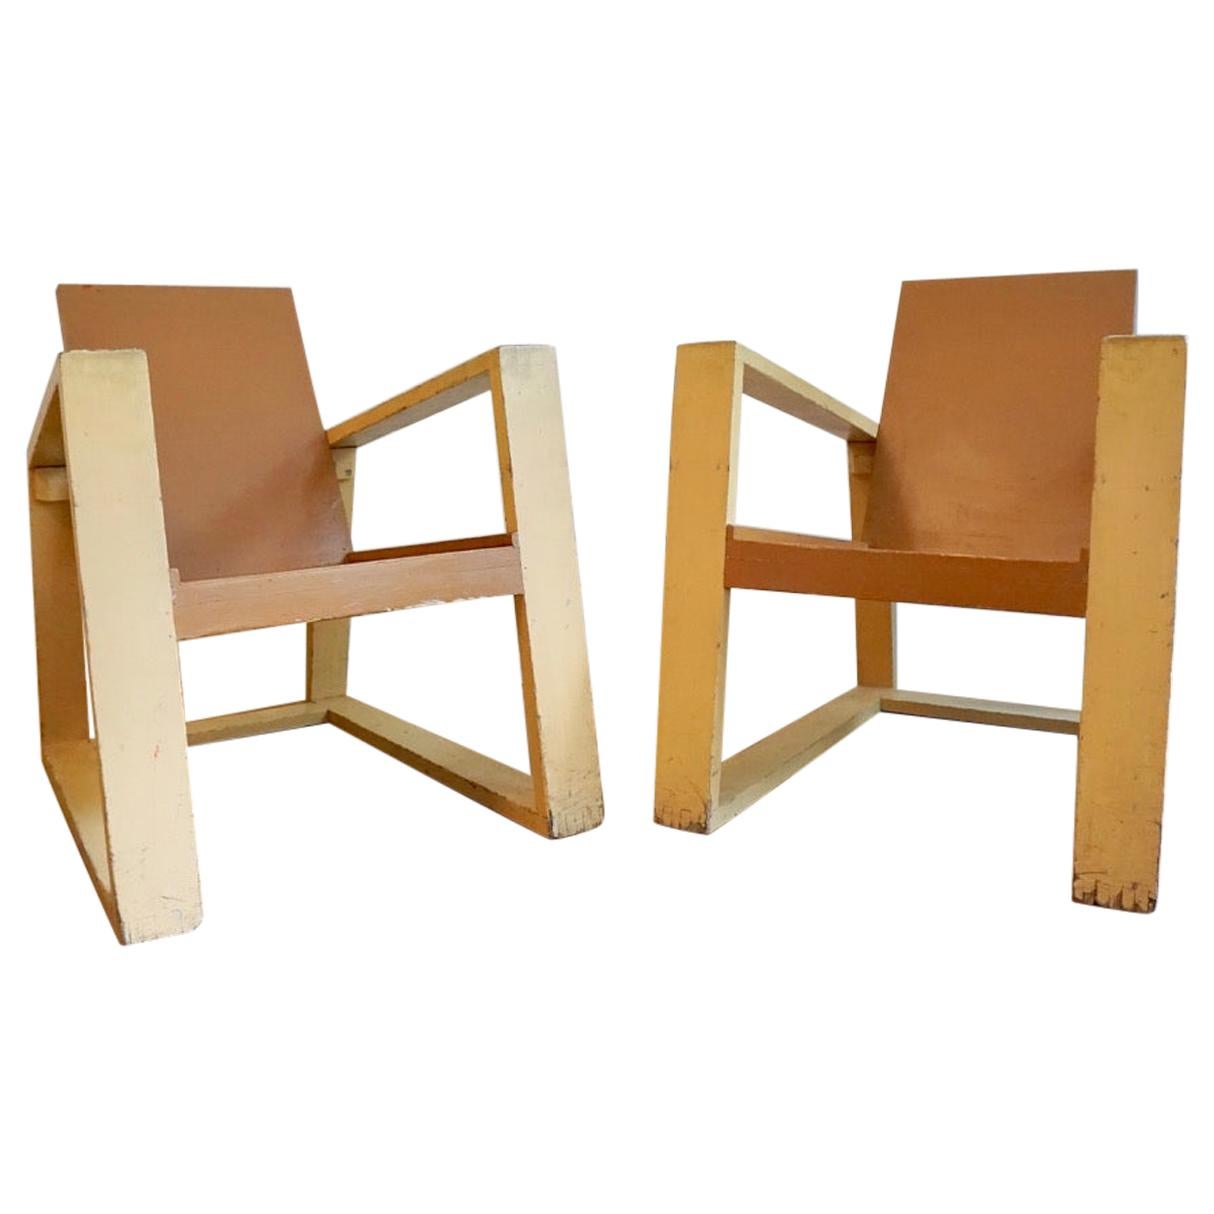 Constructivist Bauhaus Style Hungarian Set of 2 Armchairs and Table, 1920s For Sale